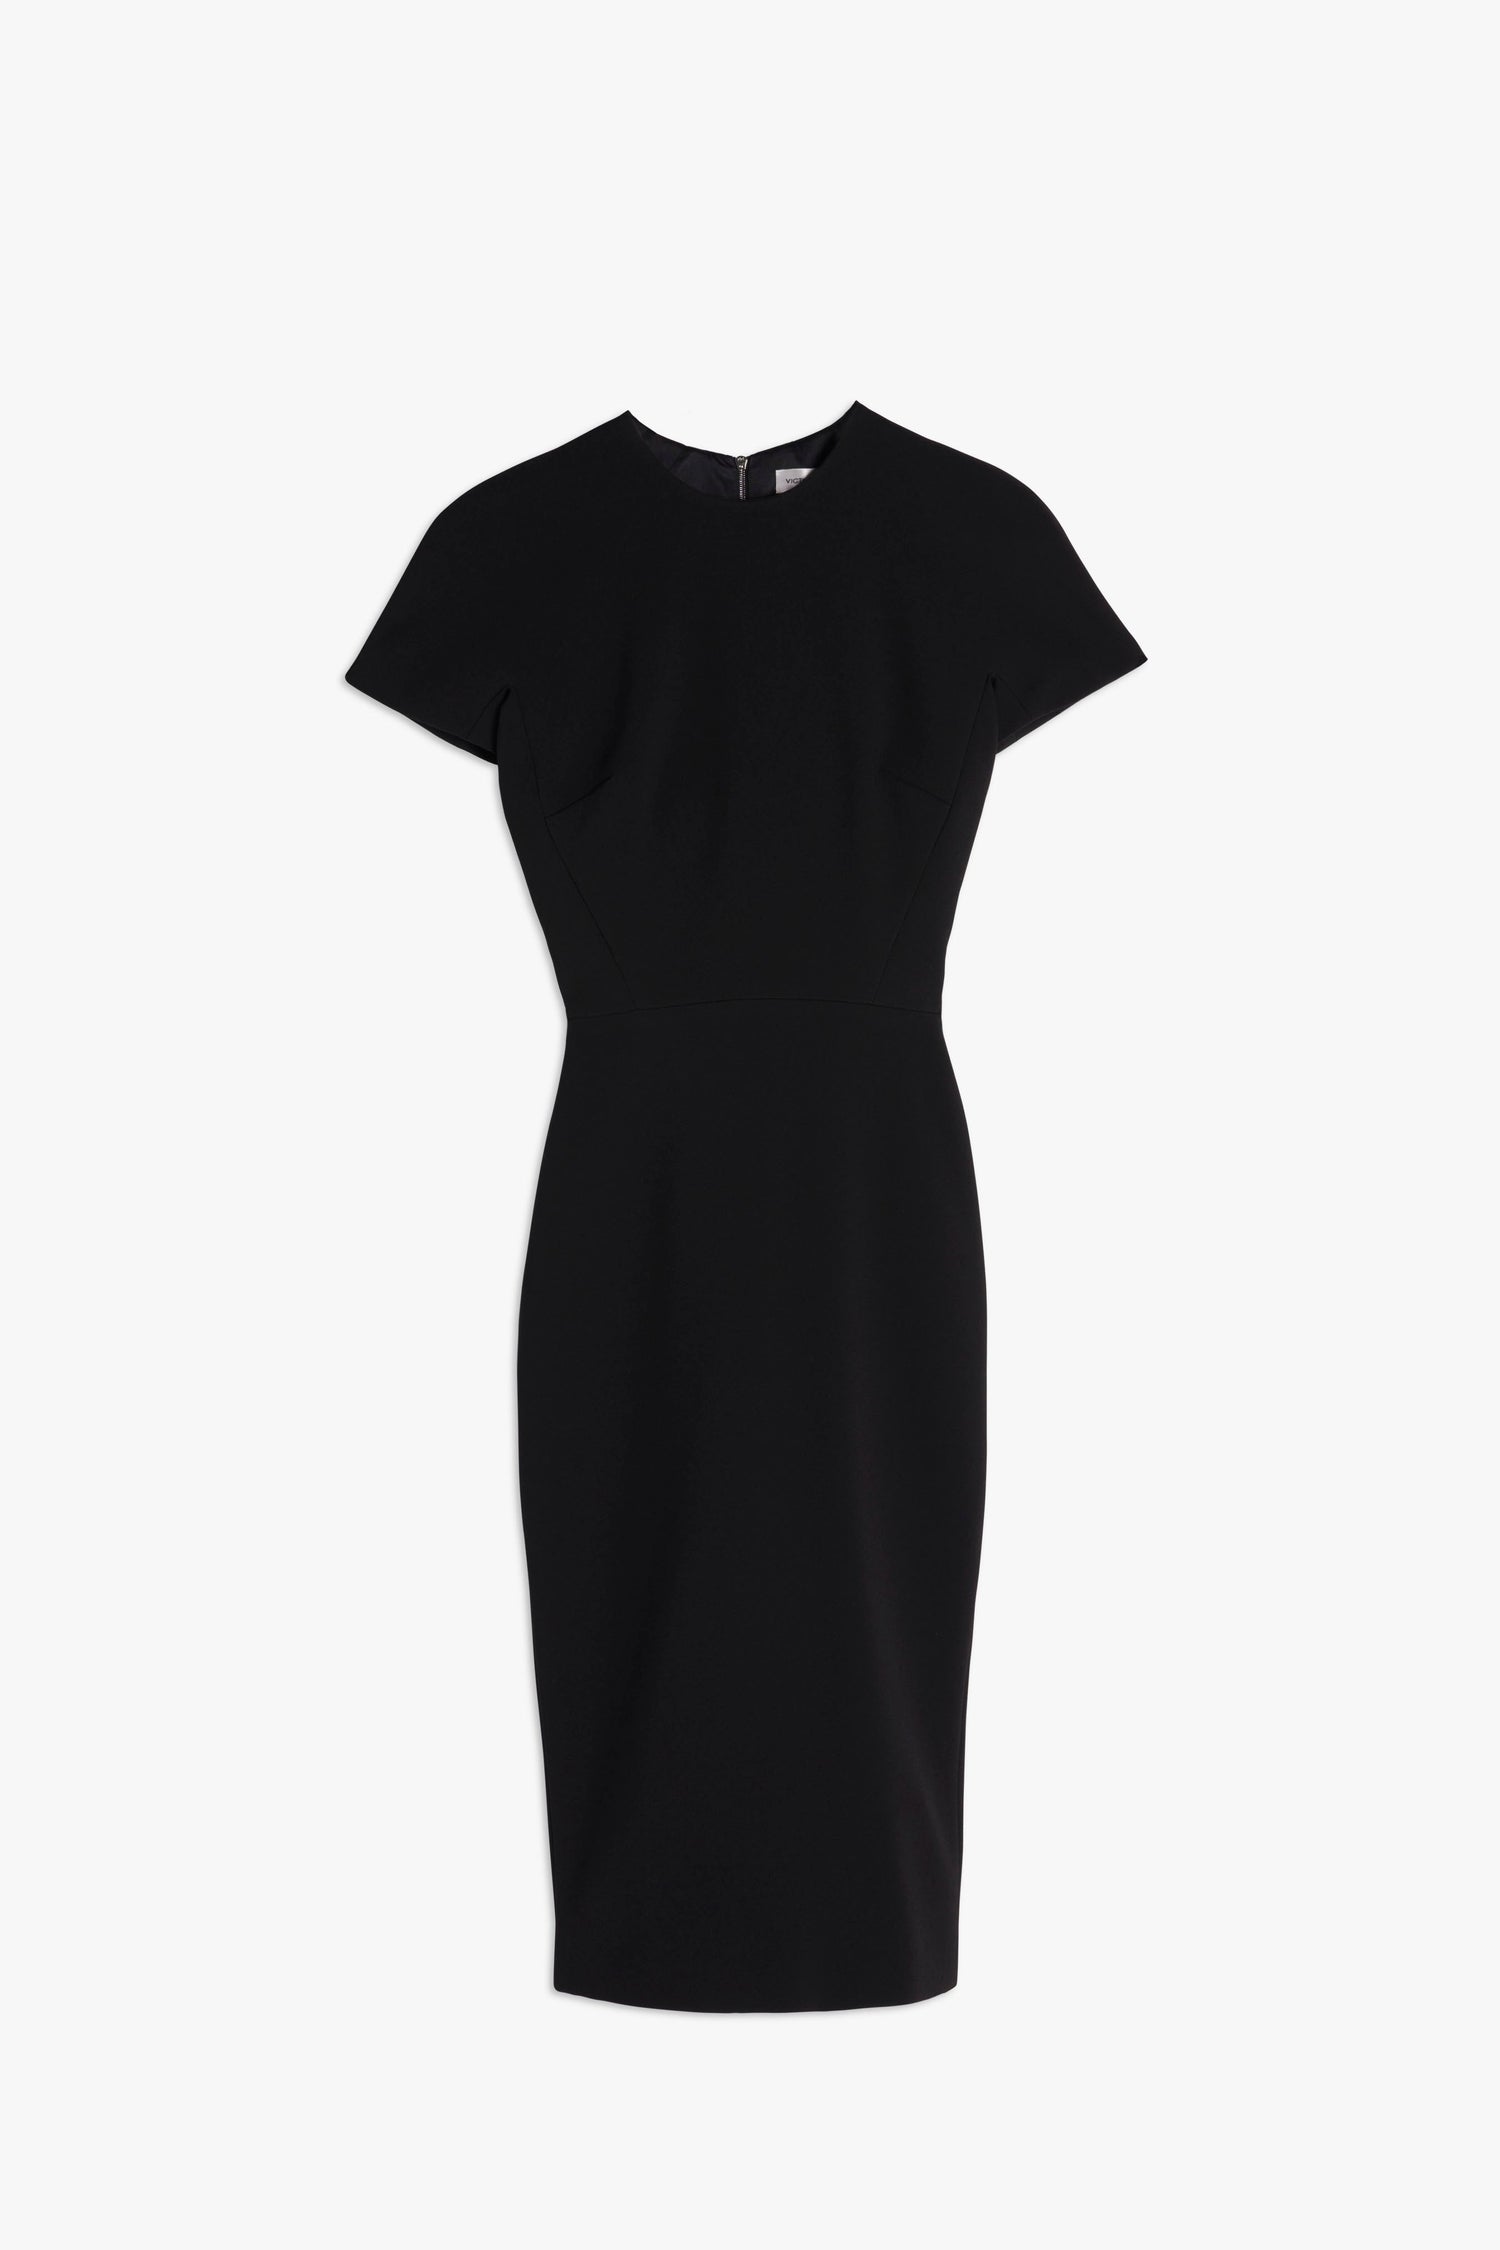 Victoria Beckham's Fitted T-Shirt Dress In Black with short sleeves and a fitted waist, crafted from bonded crepe fabric, displayed on a white background.